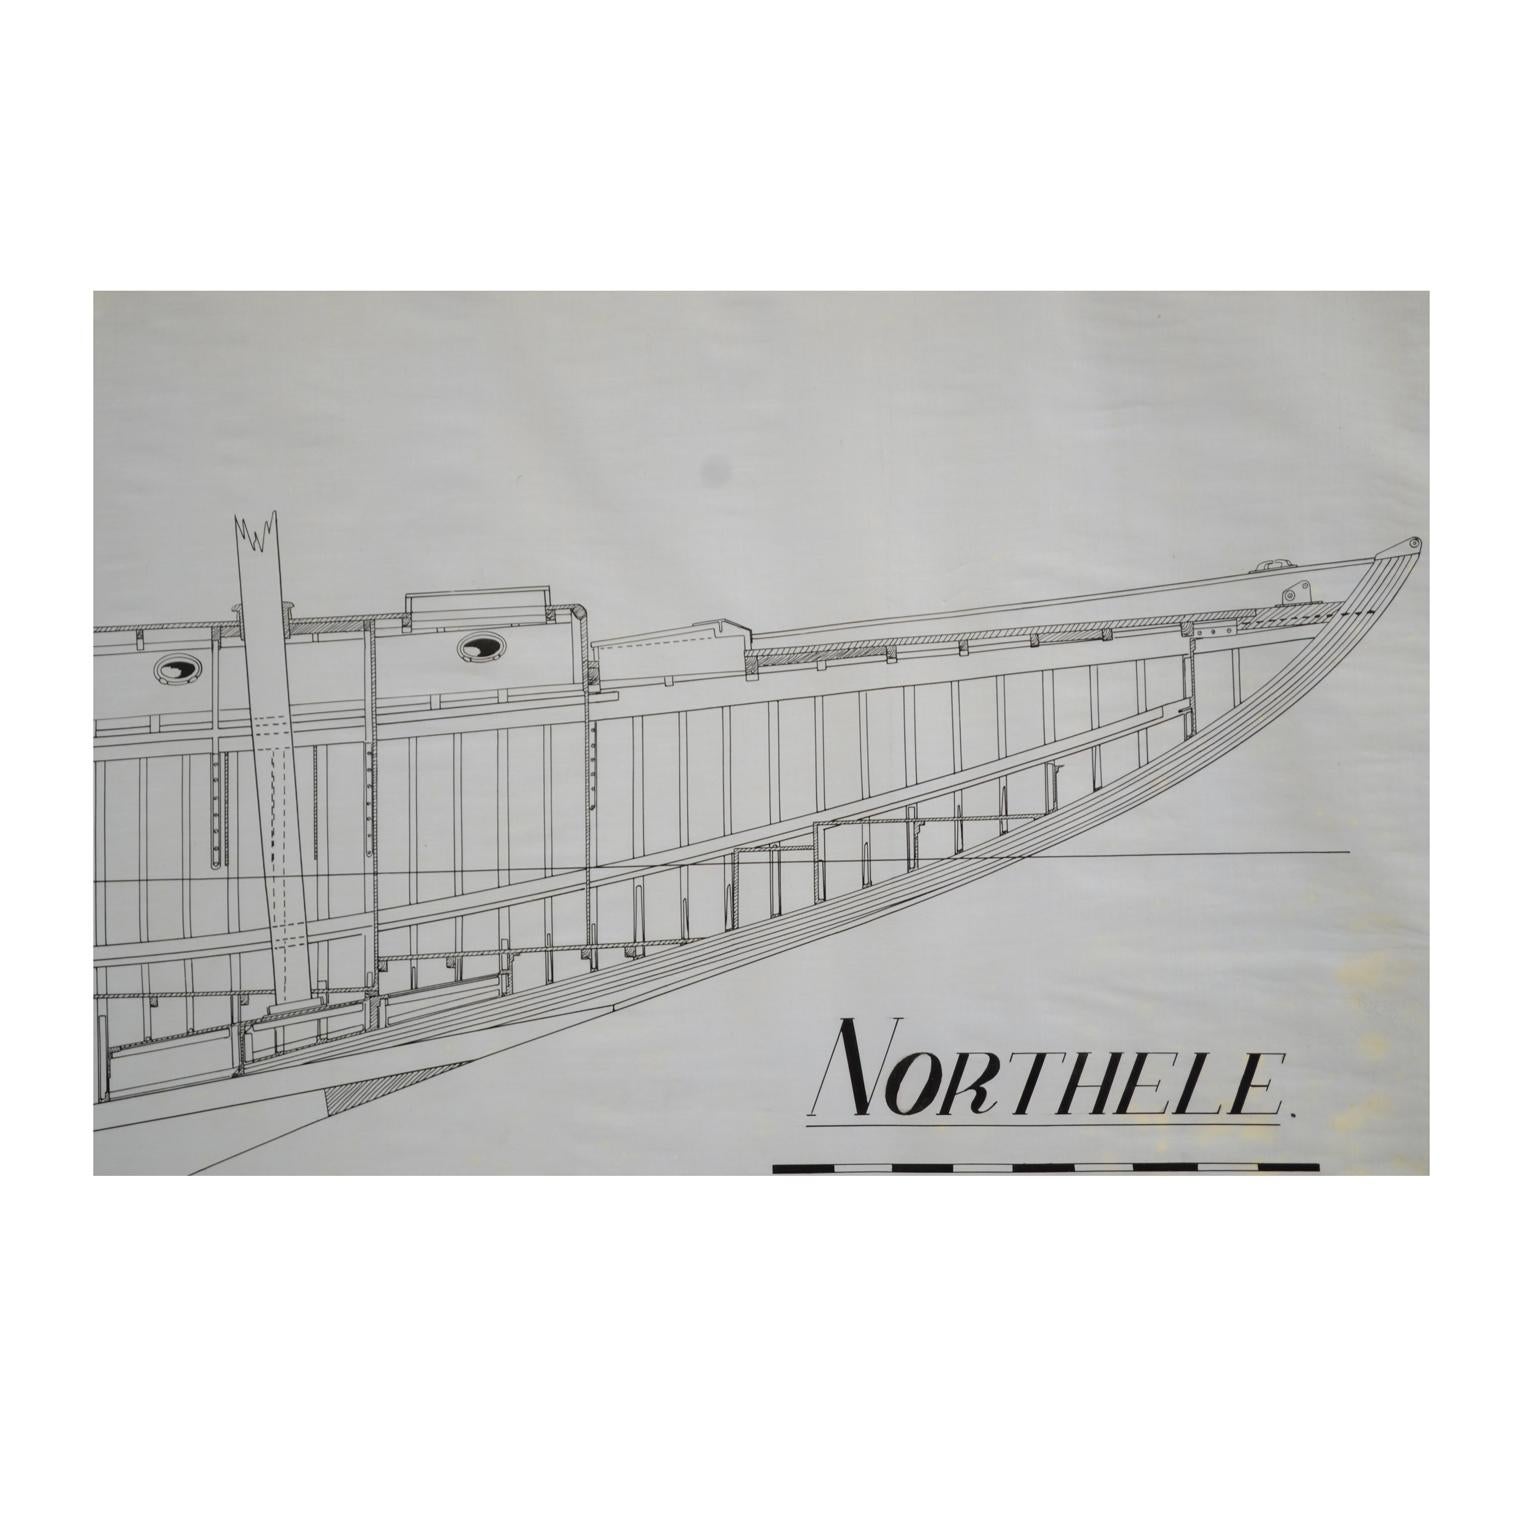 Mid-20th Century 1949s Antique Northele Nautical Ship Project by Berthon Boats Uffa Fox archives For Sale